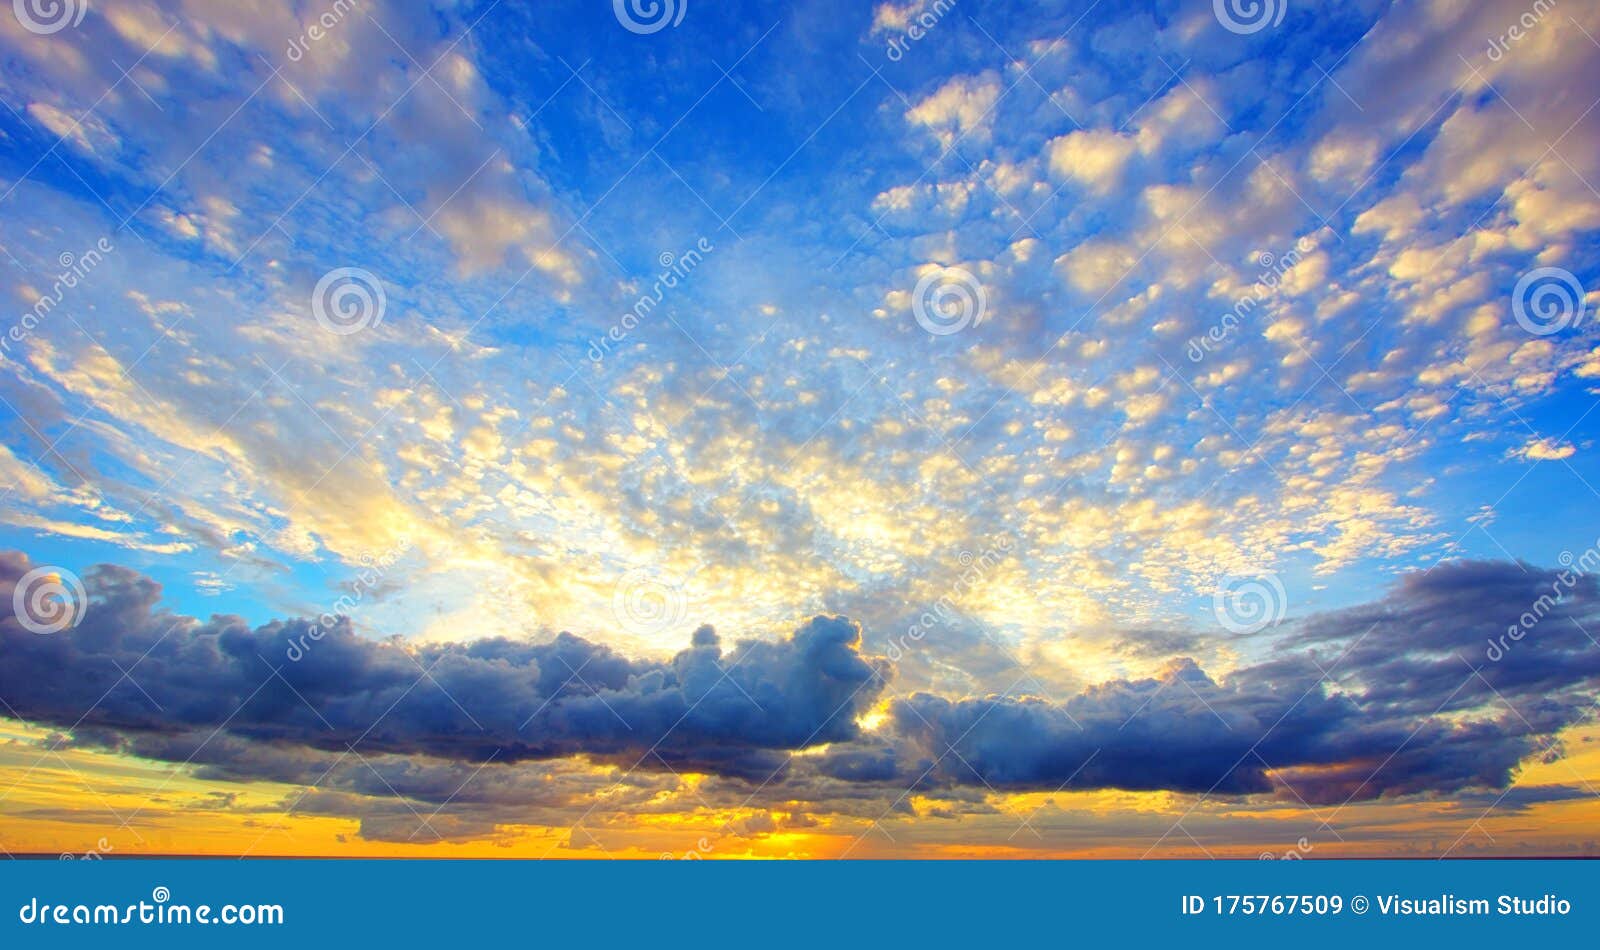 Blue Sky and Sunrise Overlay Clouds and Beautiful Blue Sky Background with  Clouds and Sunlight Beams Stock Image - Image of weather, nature: 175767509